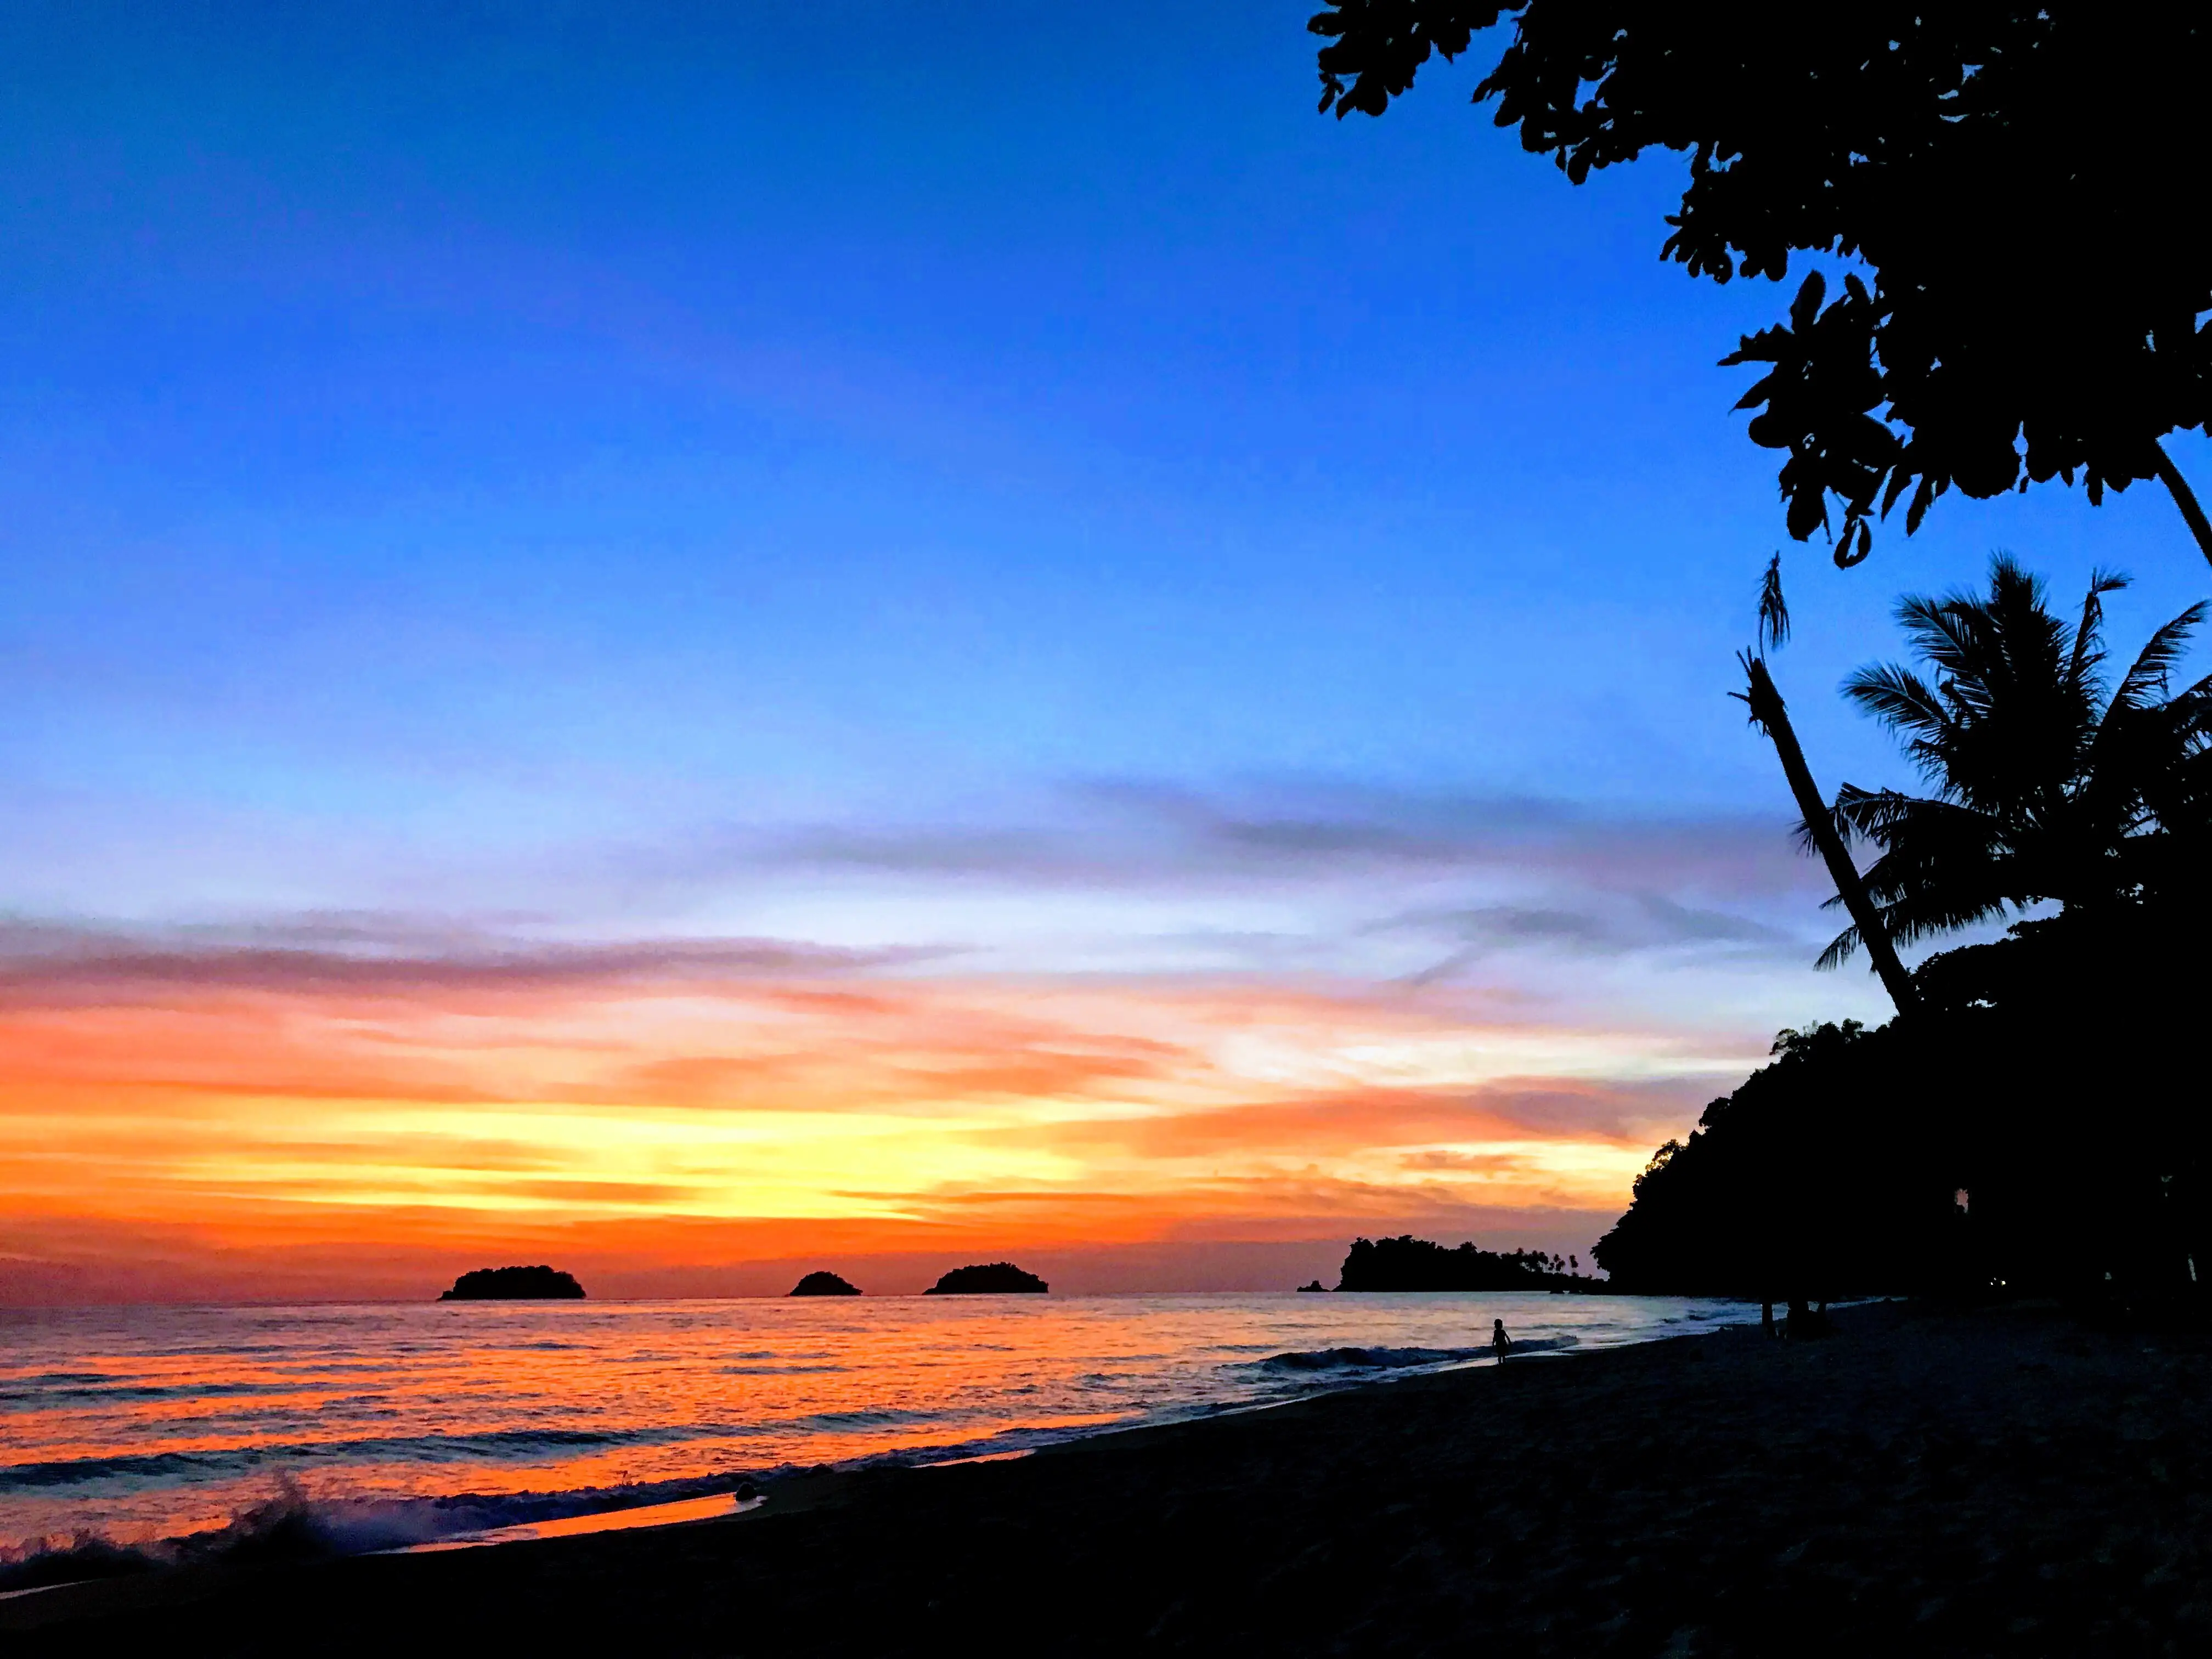 Sunset on Lonely Beach in Koh Chang, Thailand